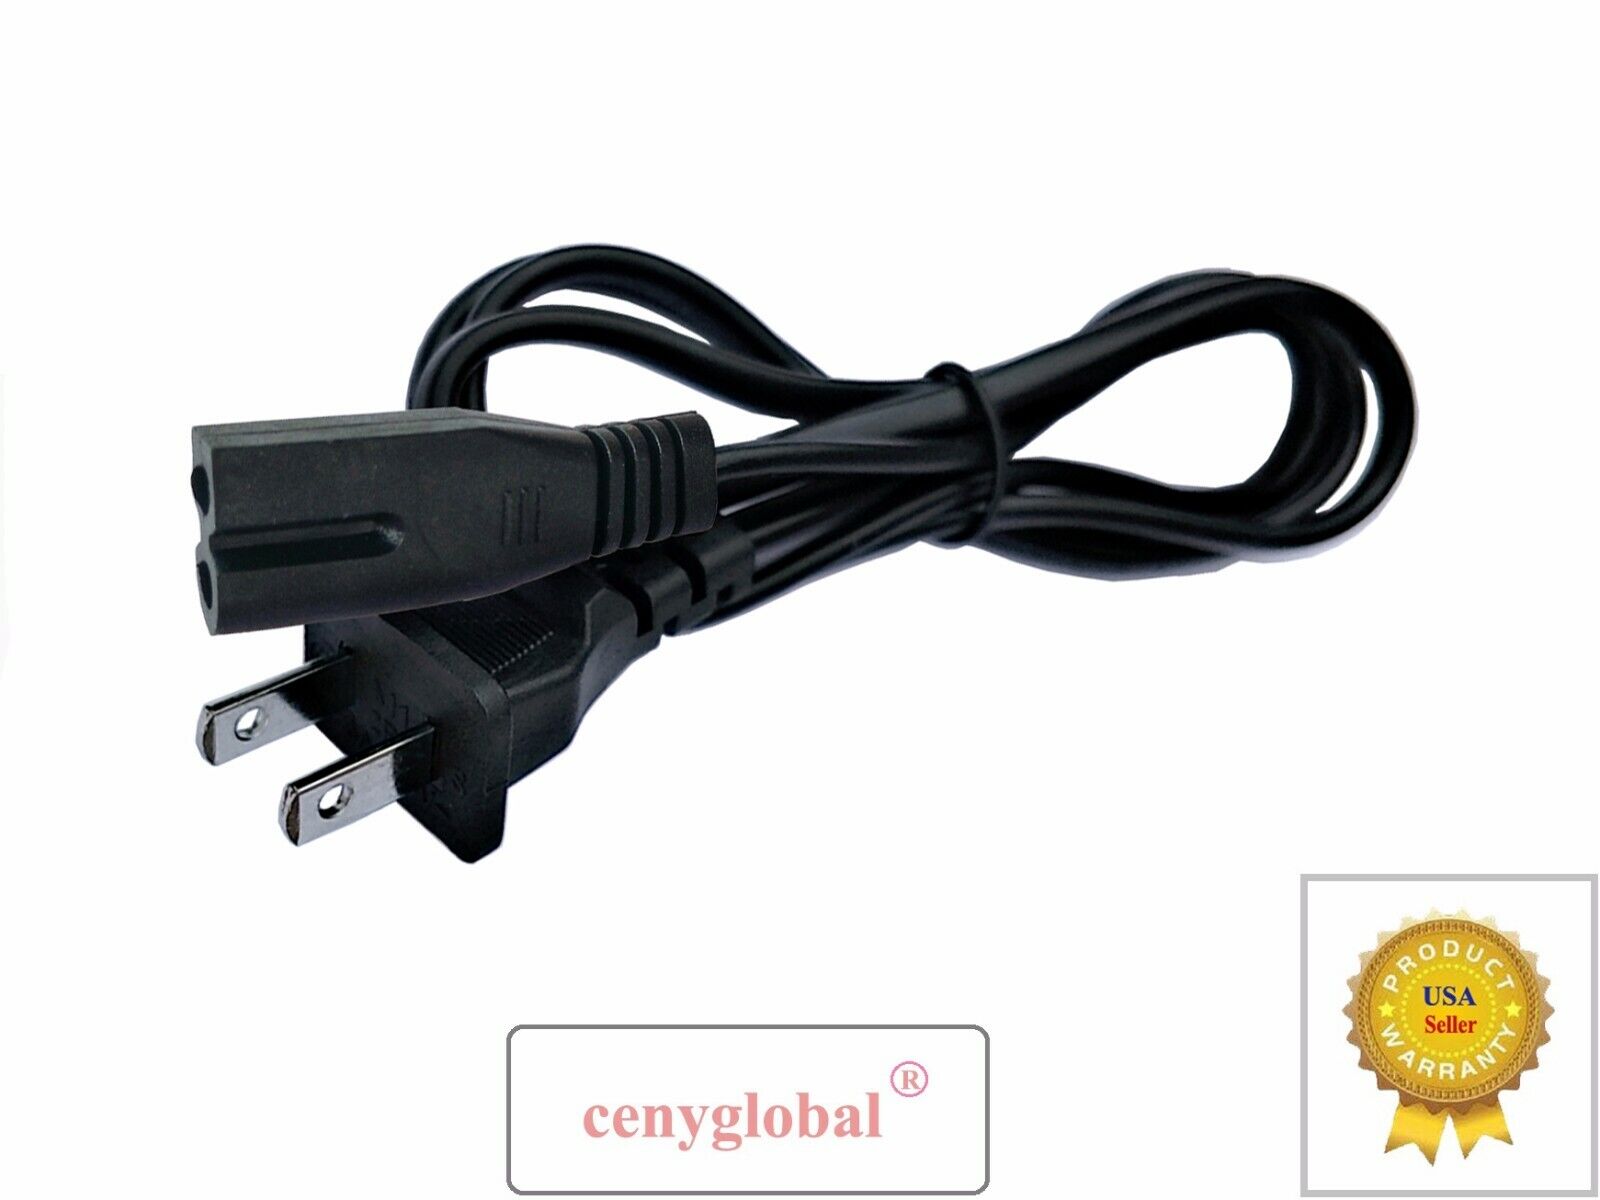 AC Power Cord Cable Plug For Panasonic  DVD CD Player Recorders CD Boombox